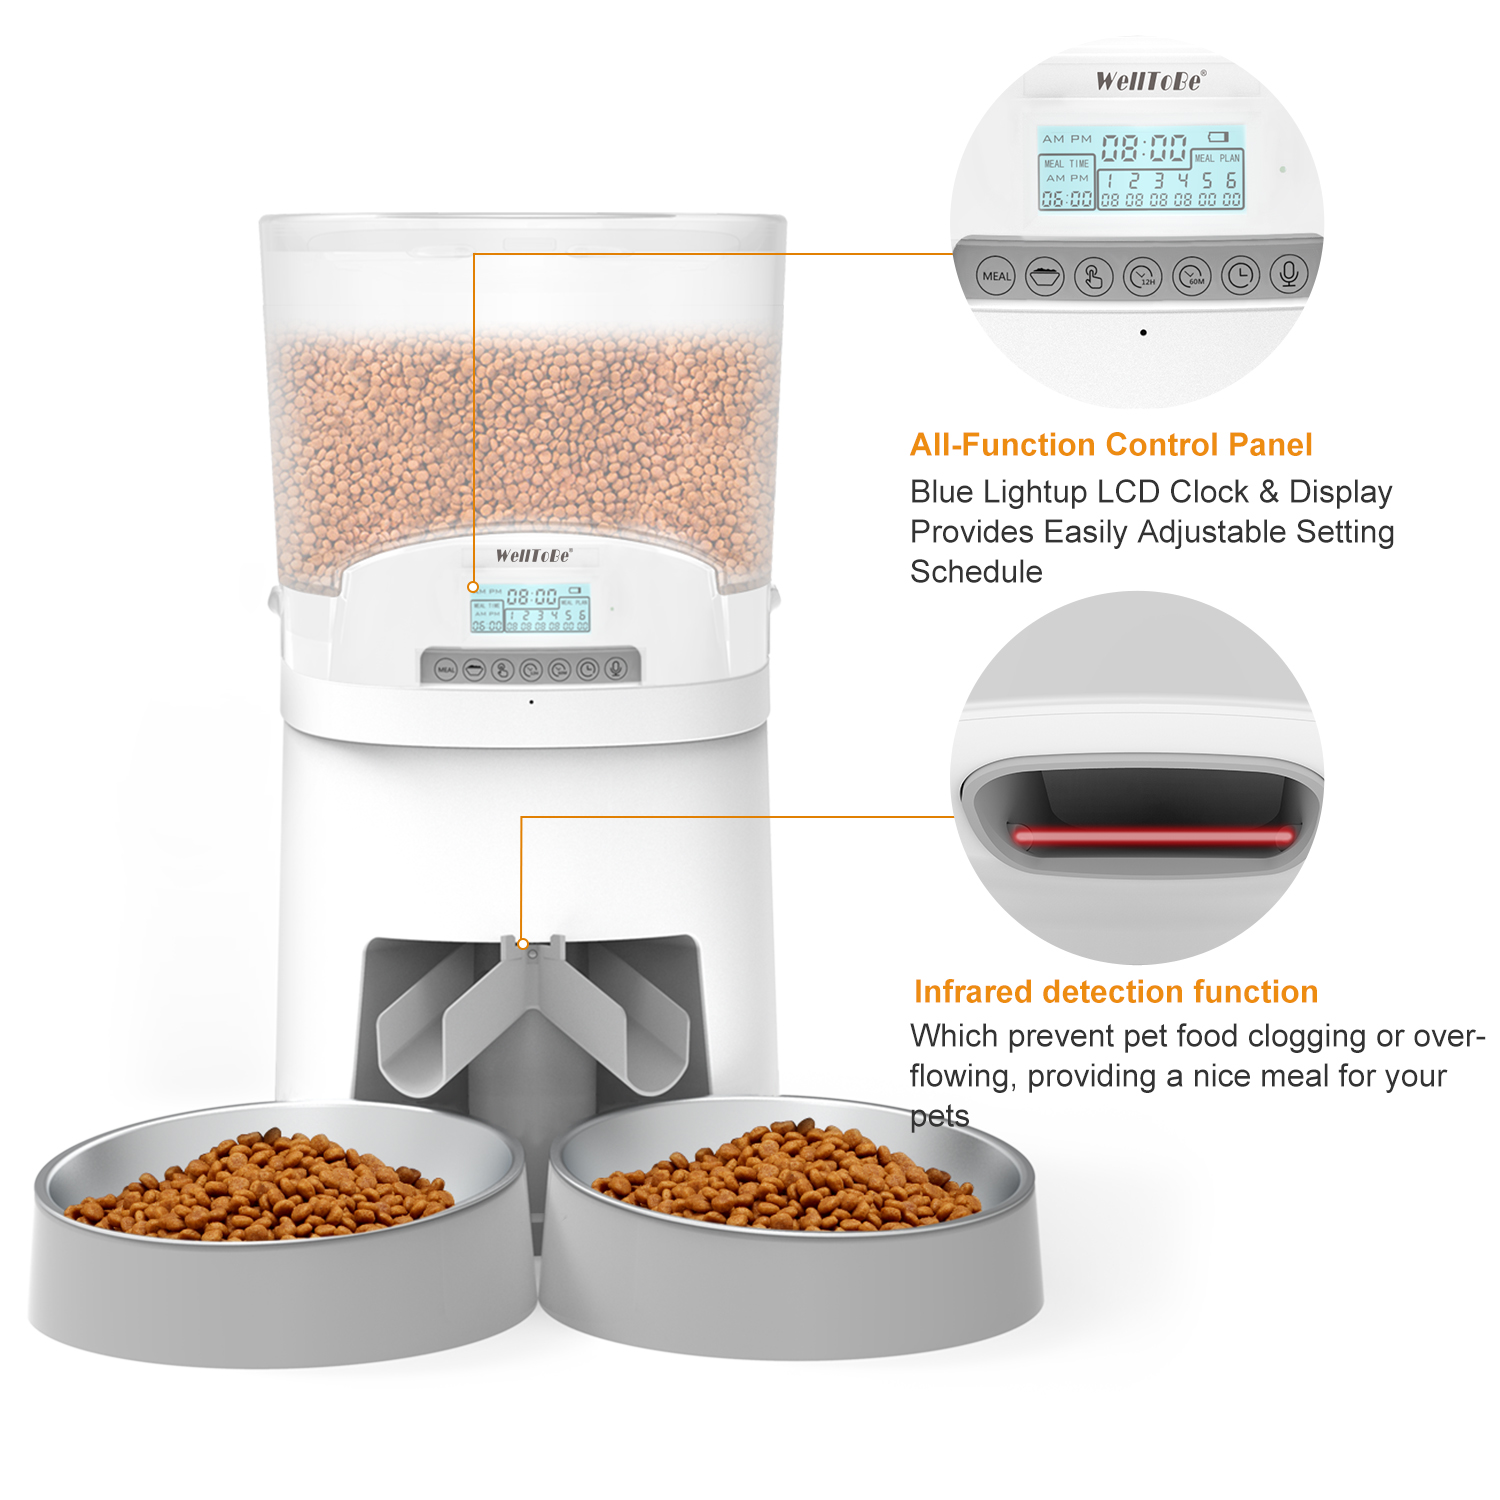 PDPETS Automatic Pet feeder with Two-Way Splitter and Double Bowls Pet Feeder Smart for Dogs Cats